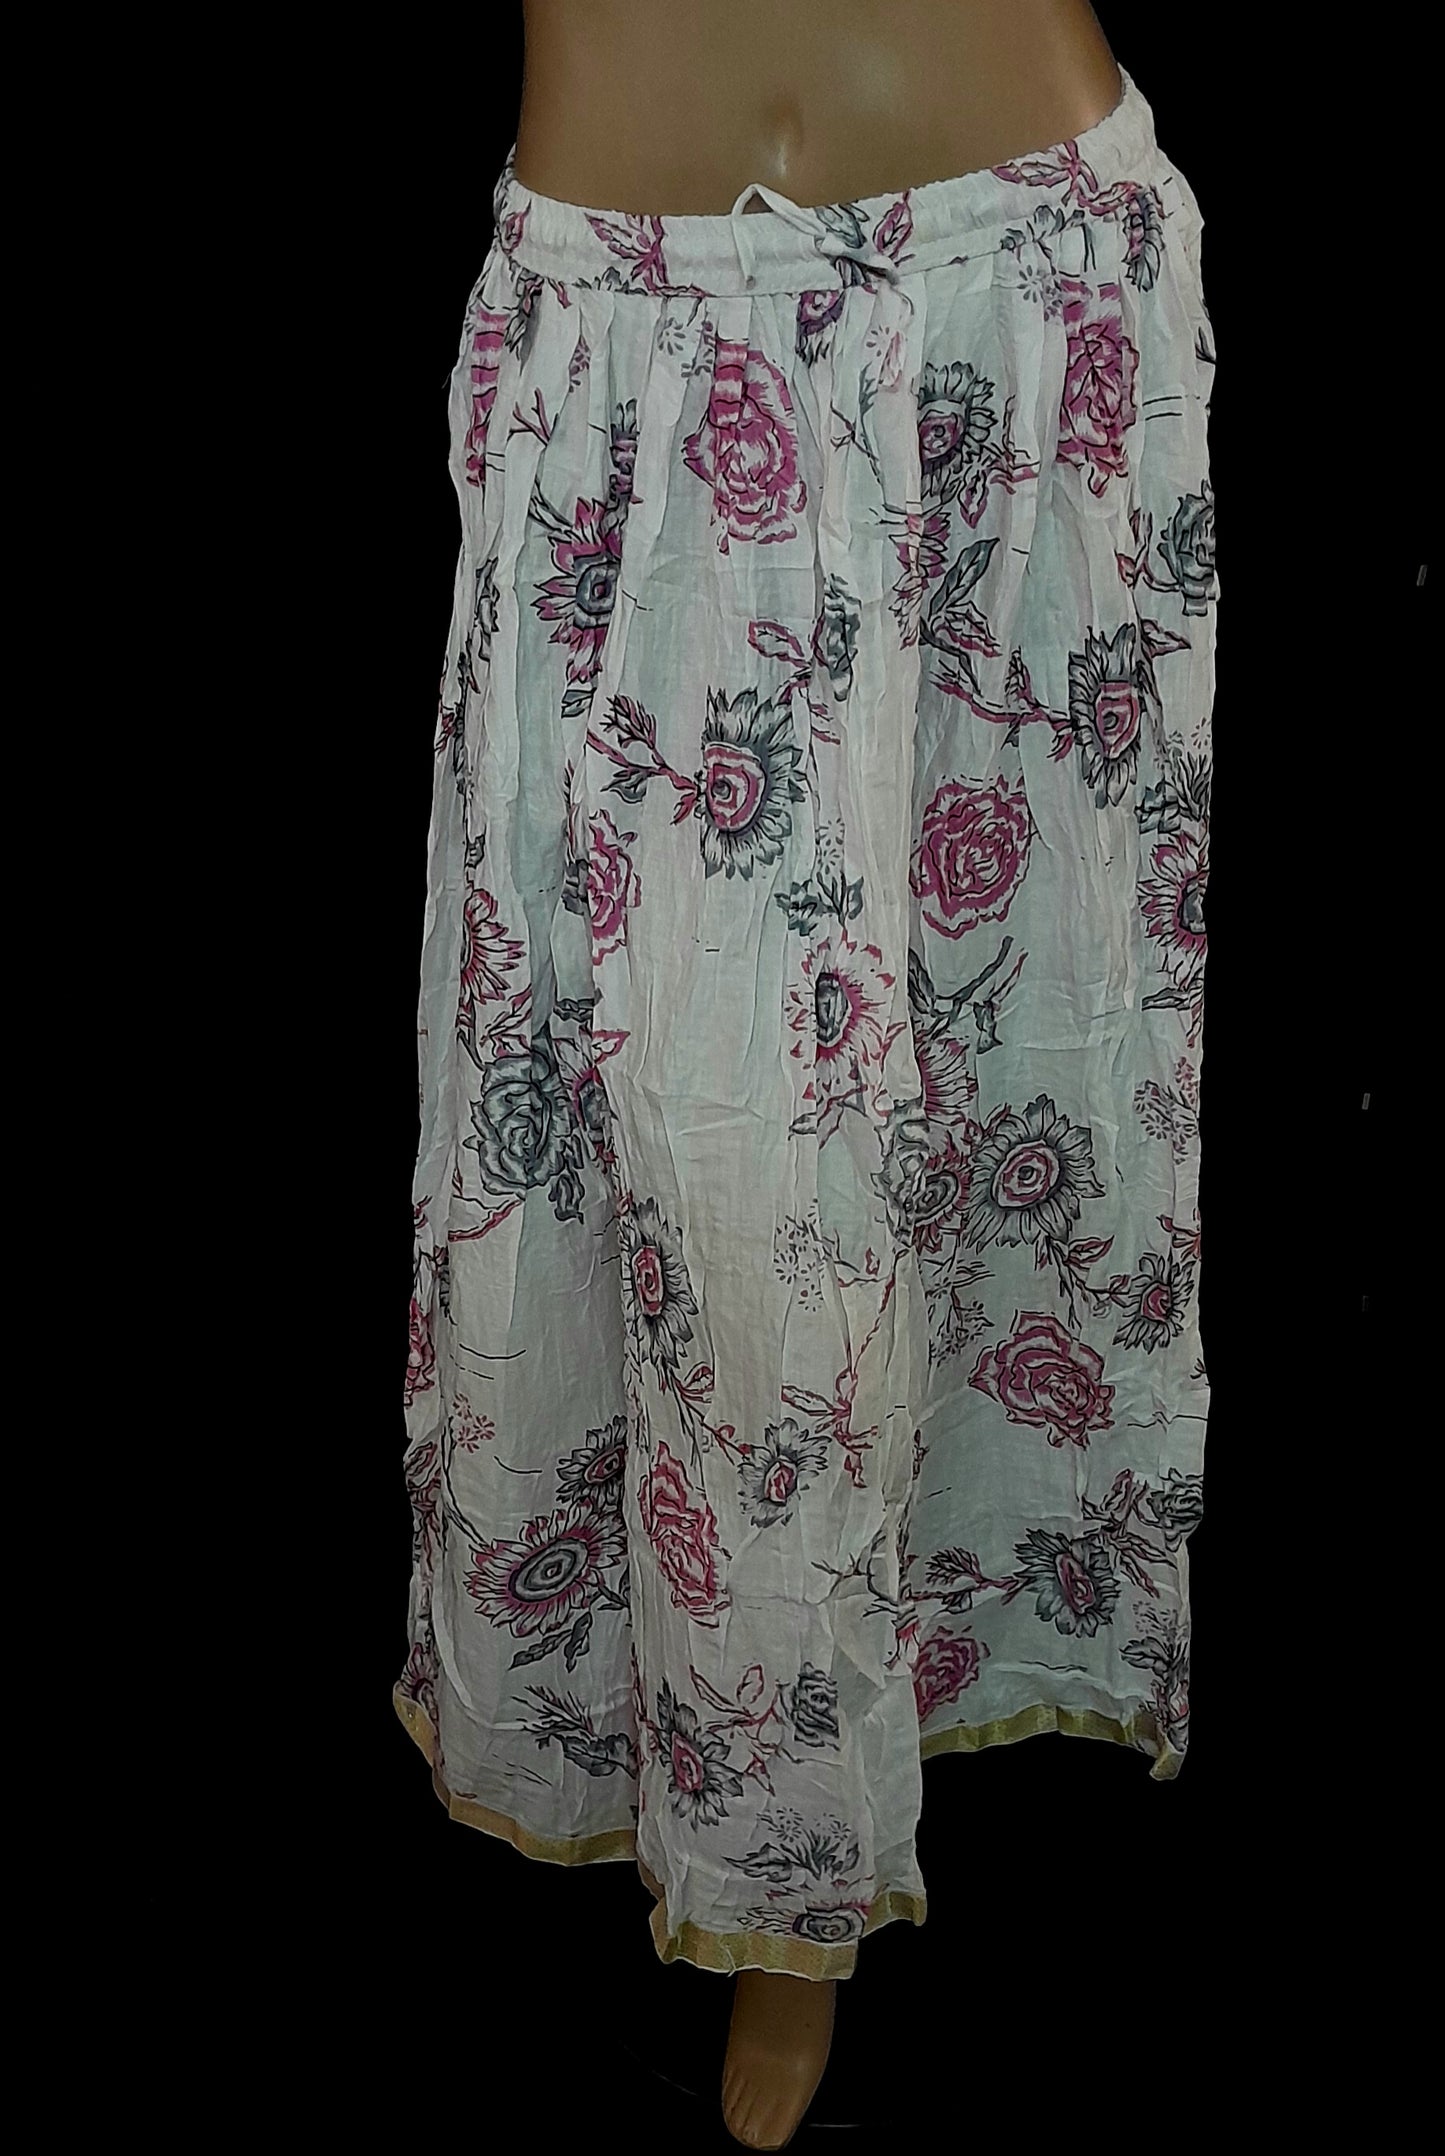 Feminine and Flattering White Base with Bold Floral Print Jaipur Cotton Skirt Perfect for Spring and Summer Fashion - Size (M-38)